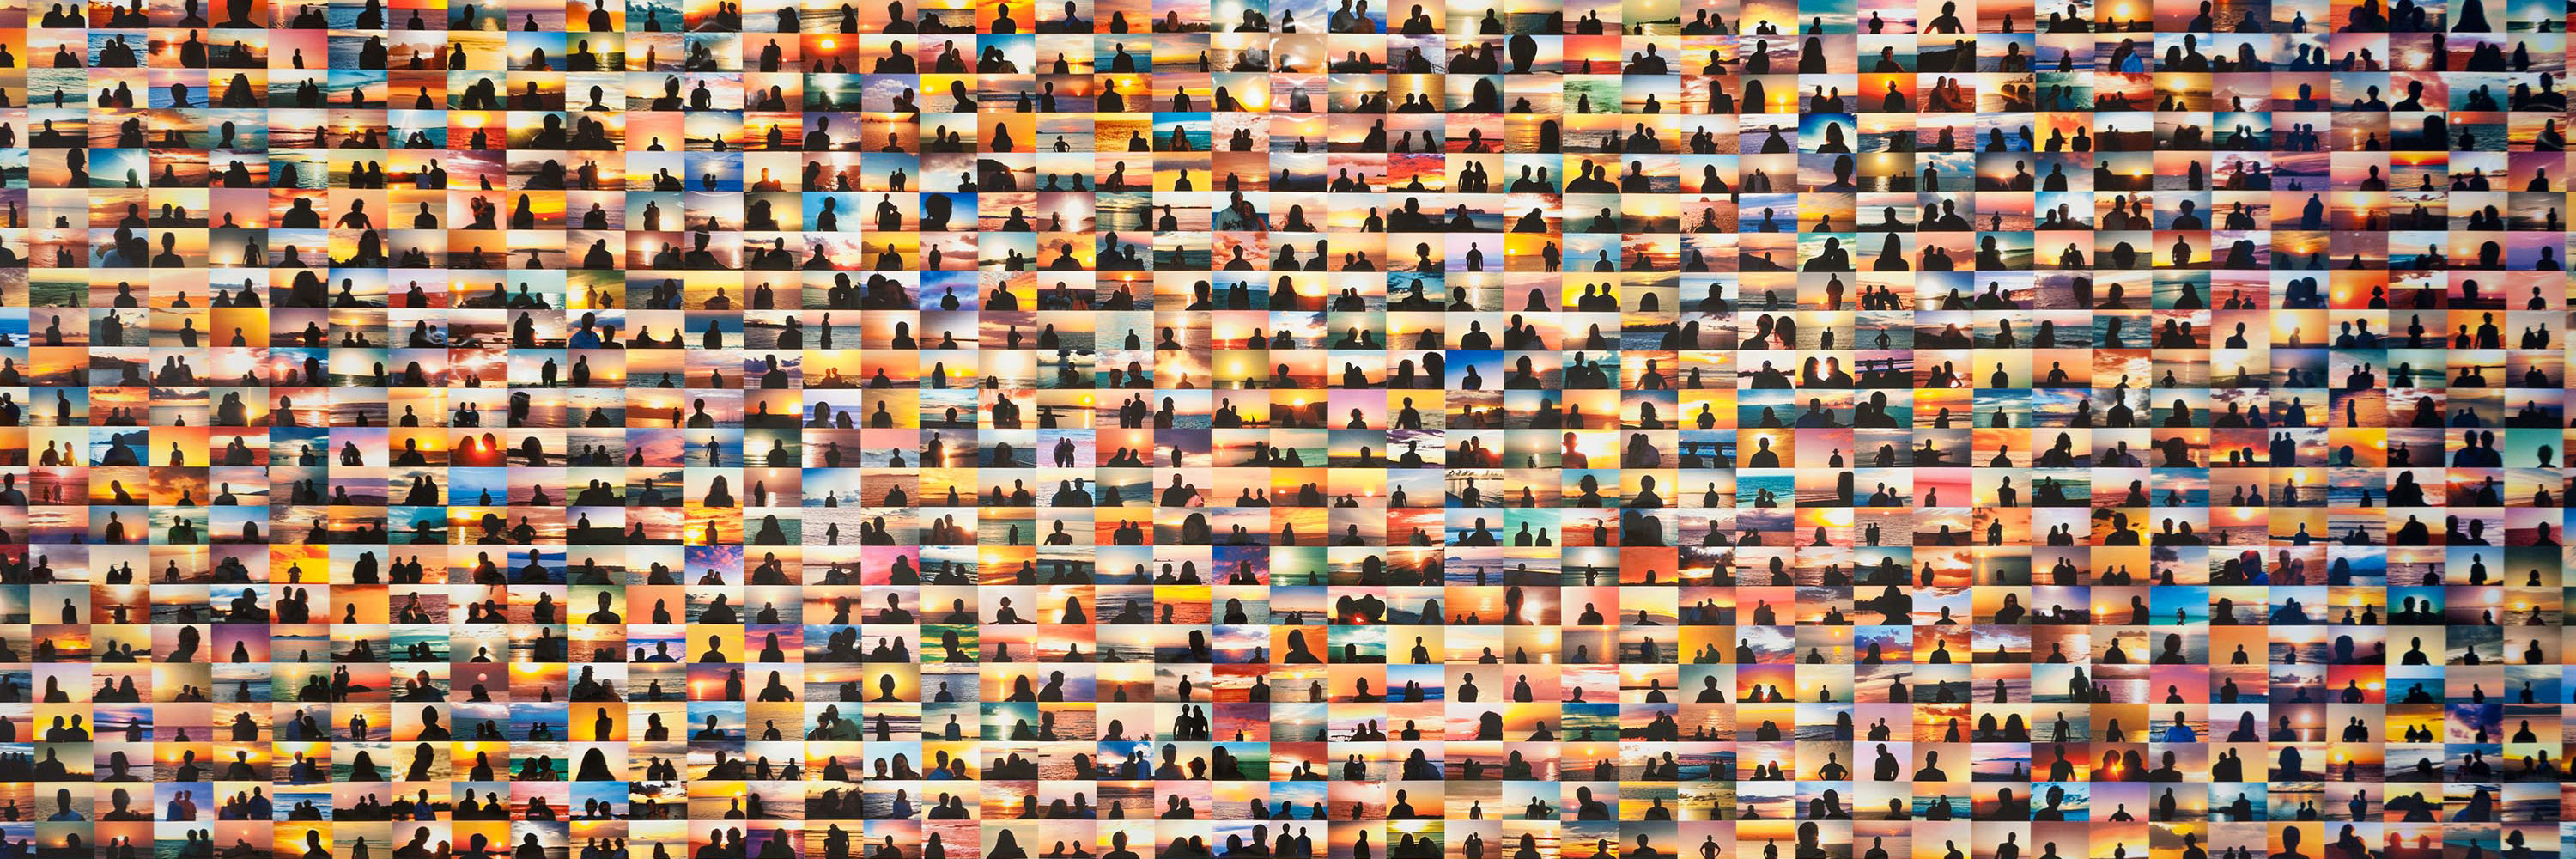 Grid of images comprised of many sunset portraits